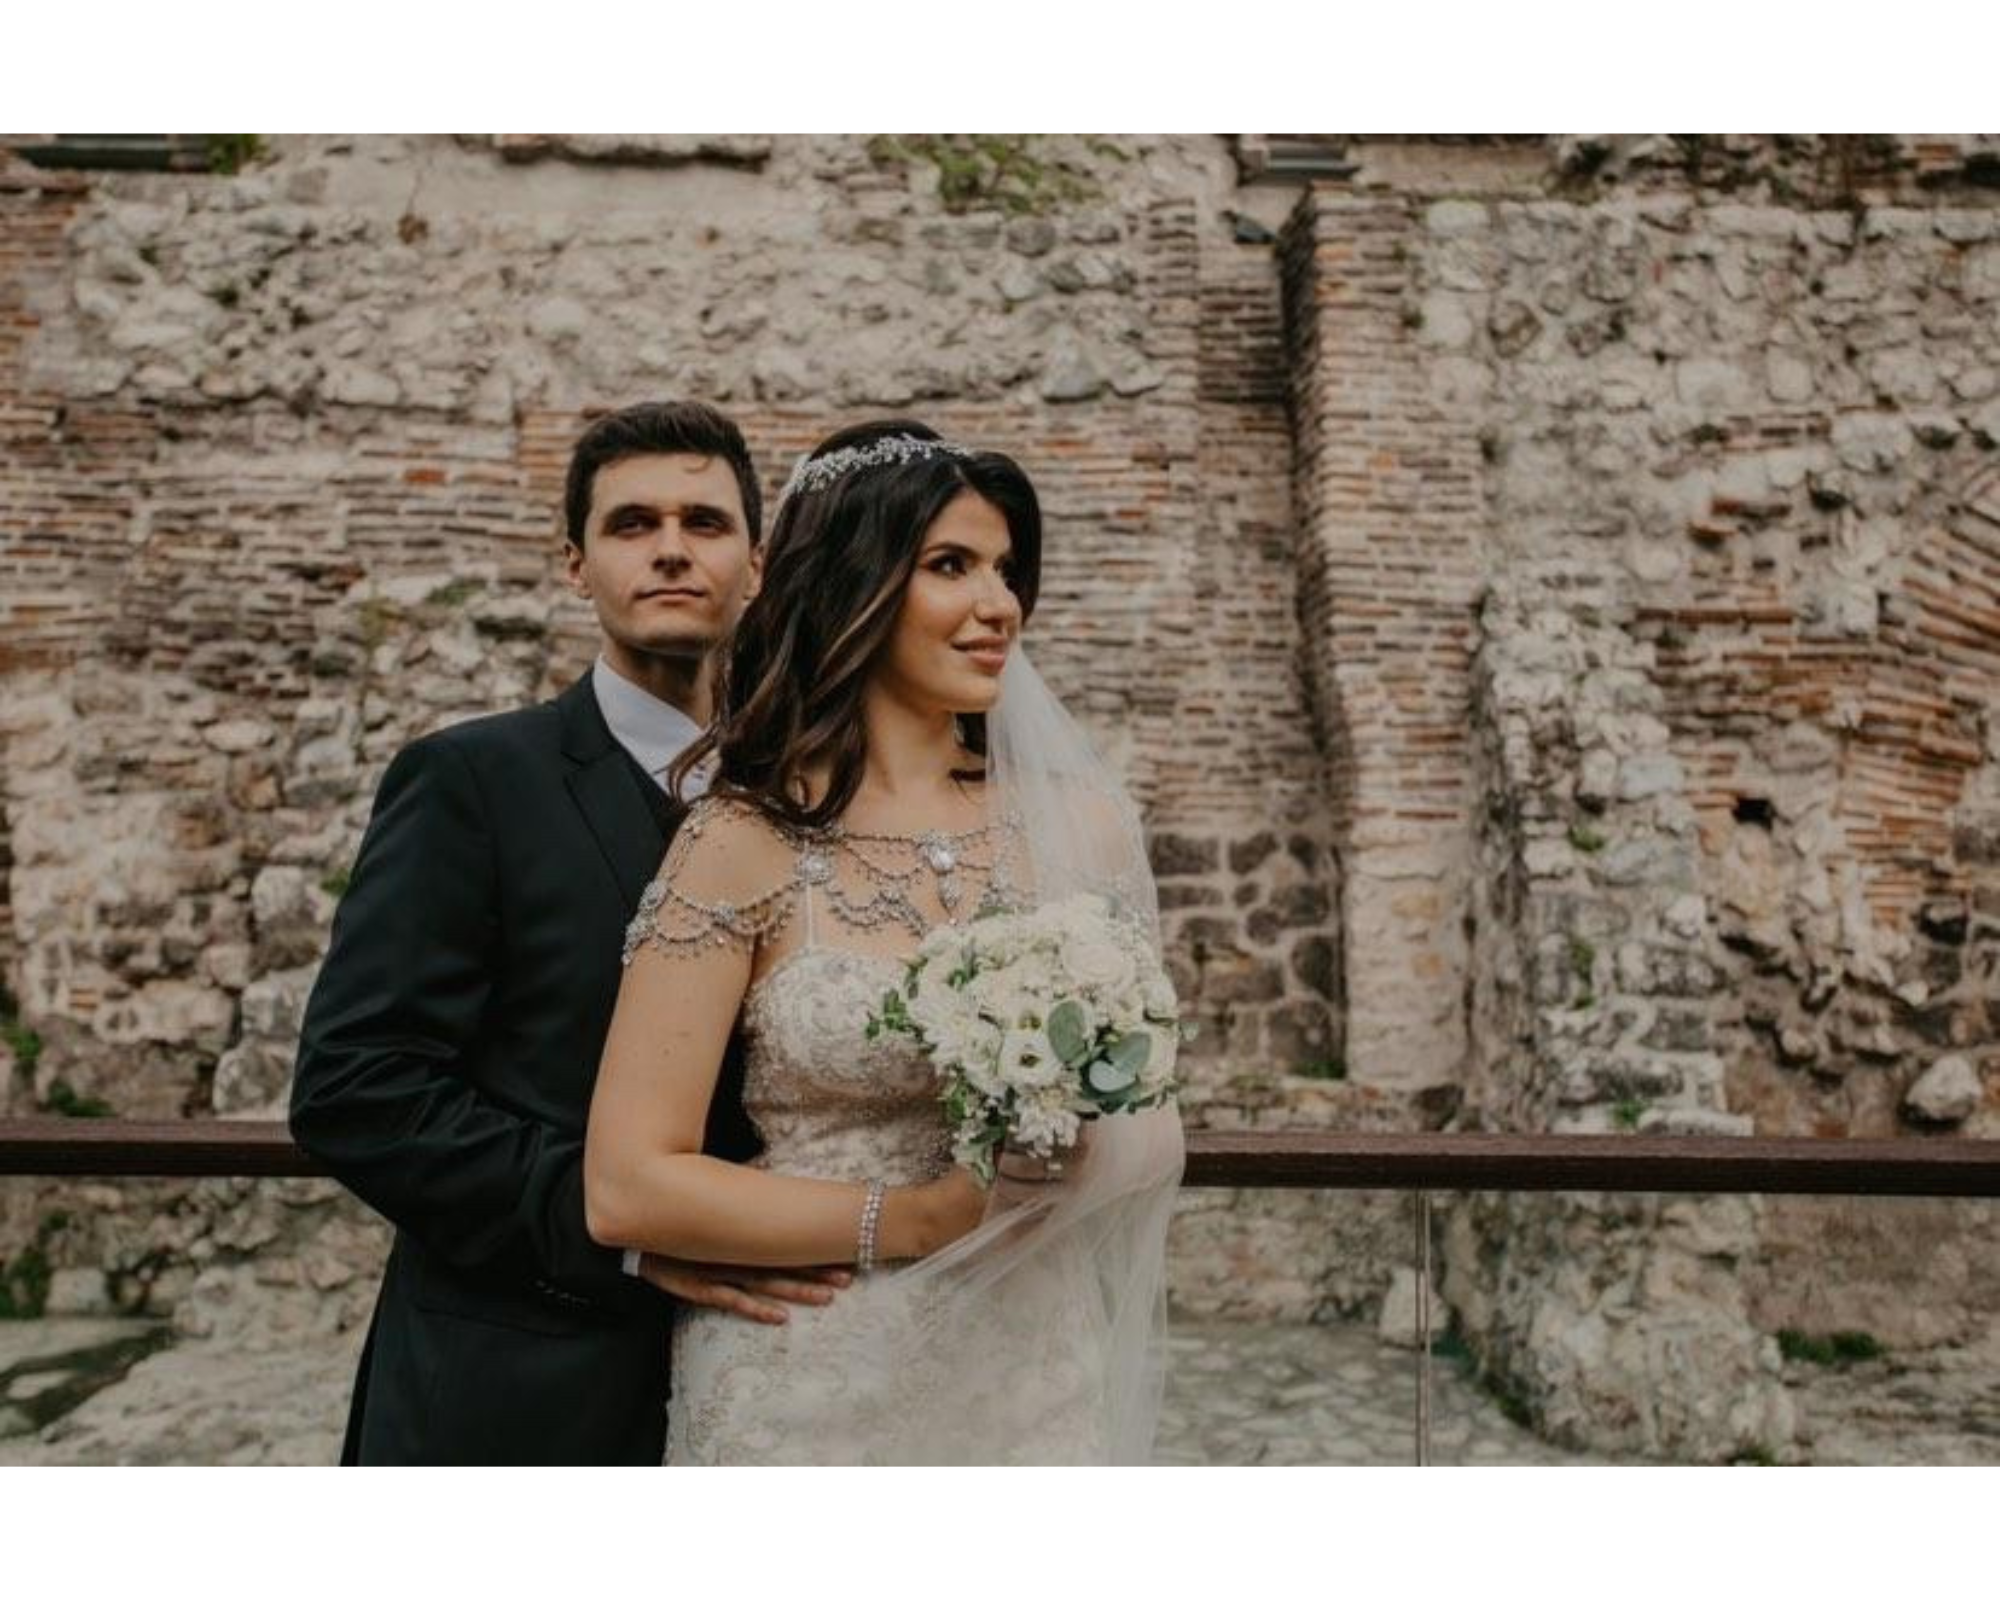 Our bride and groom on a quaint European street. She’s wearing her lace gown, custom wedding dress jewelry, and crystal wedding headpiece.